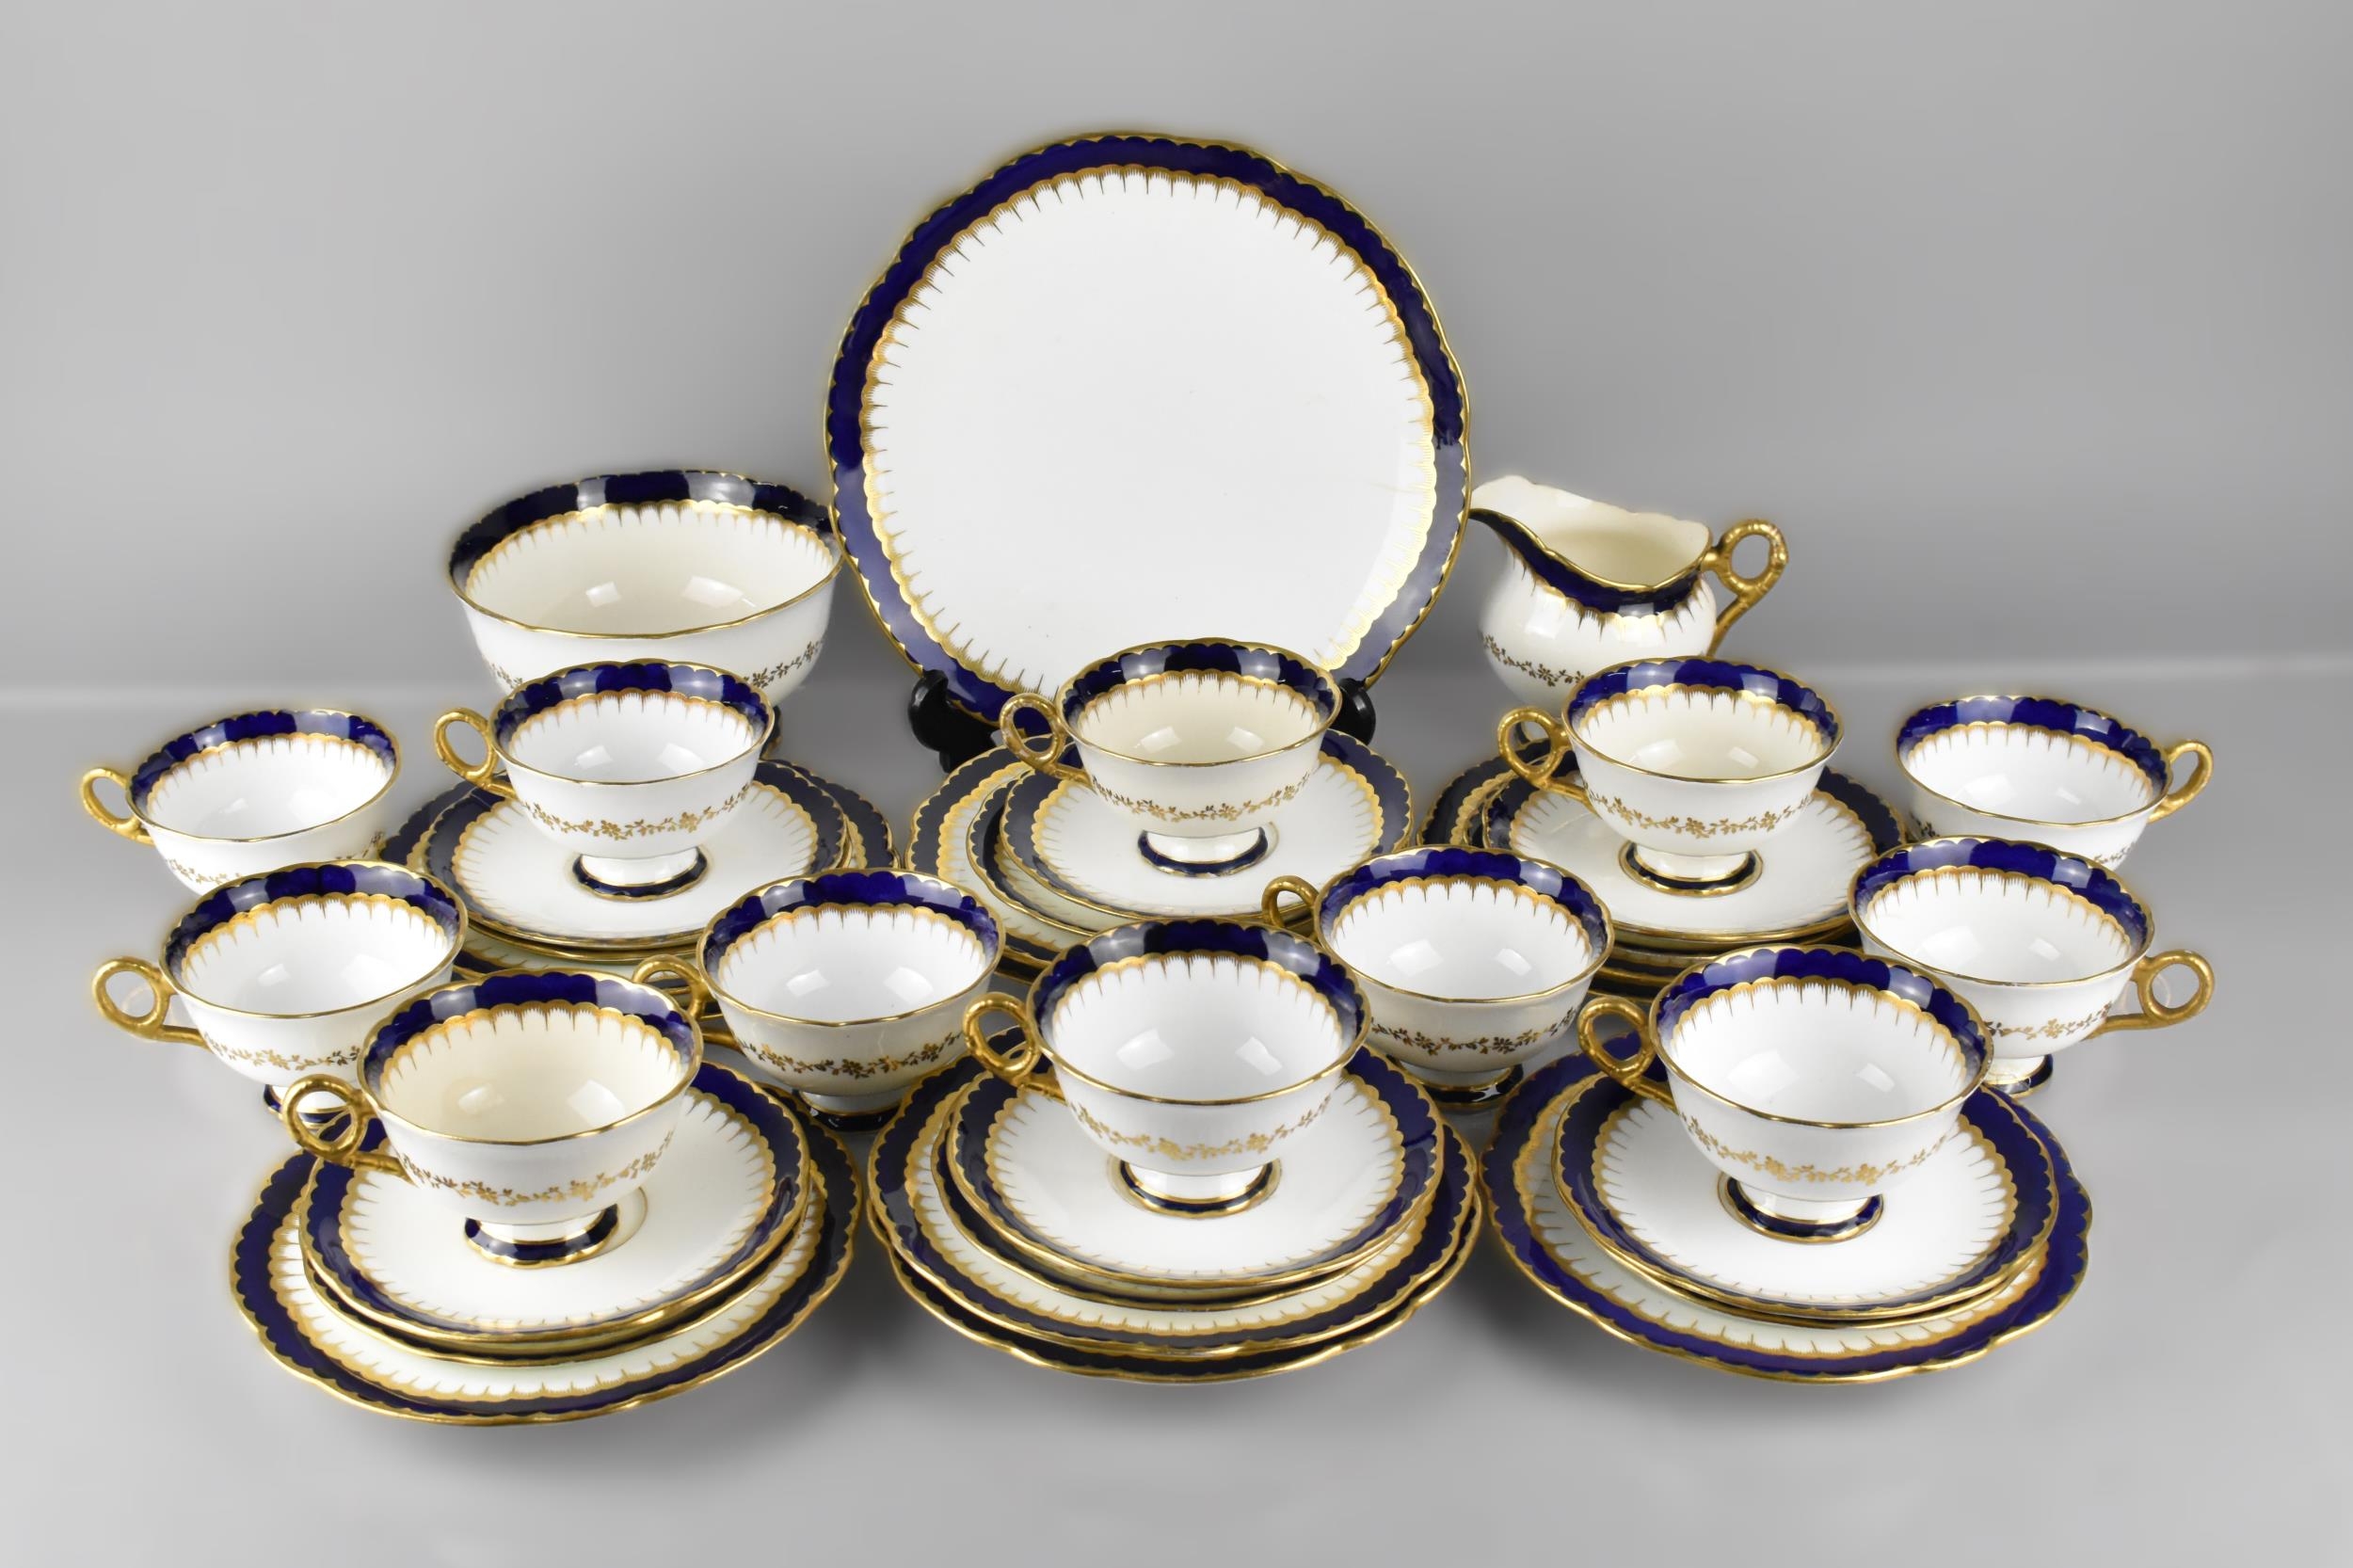 A Late 19th/Early 20th Century Coalport Tea Set Decorated with Cobalt Inset and Gilt Highlight to